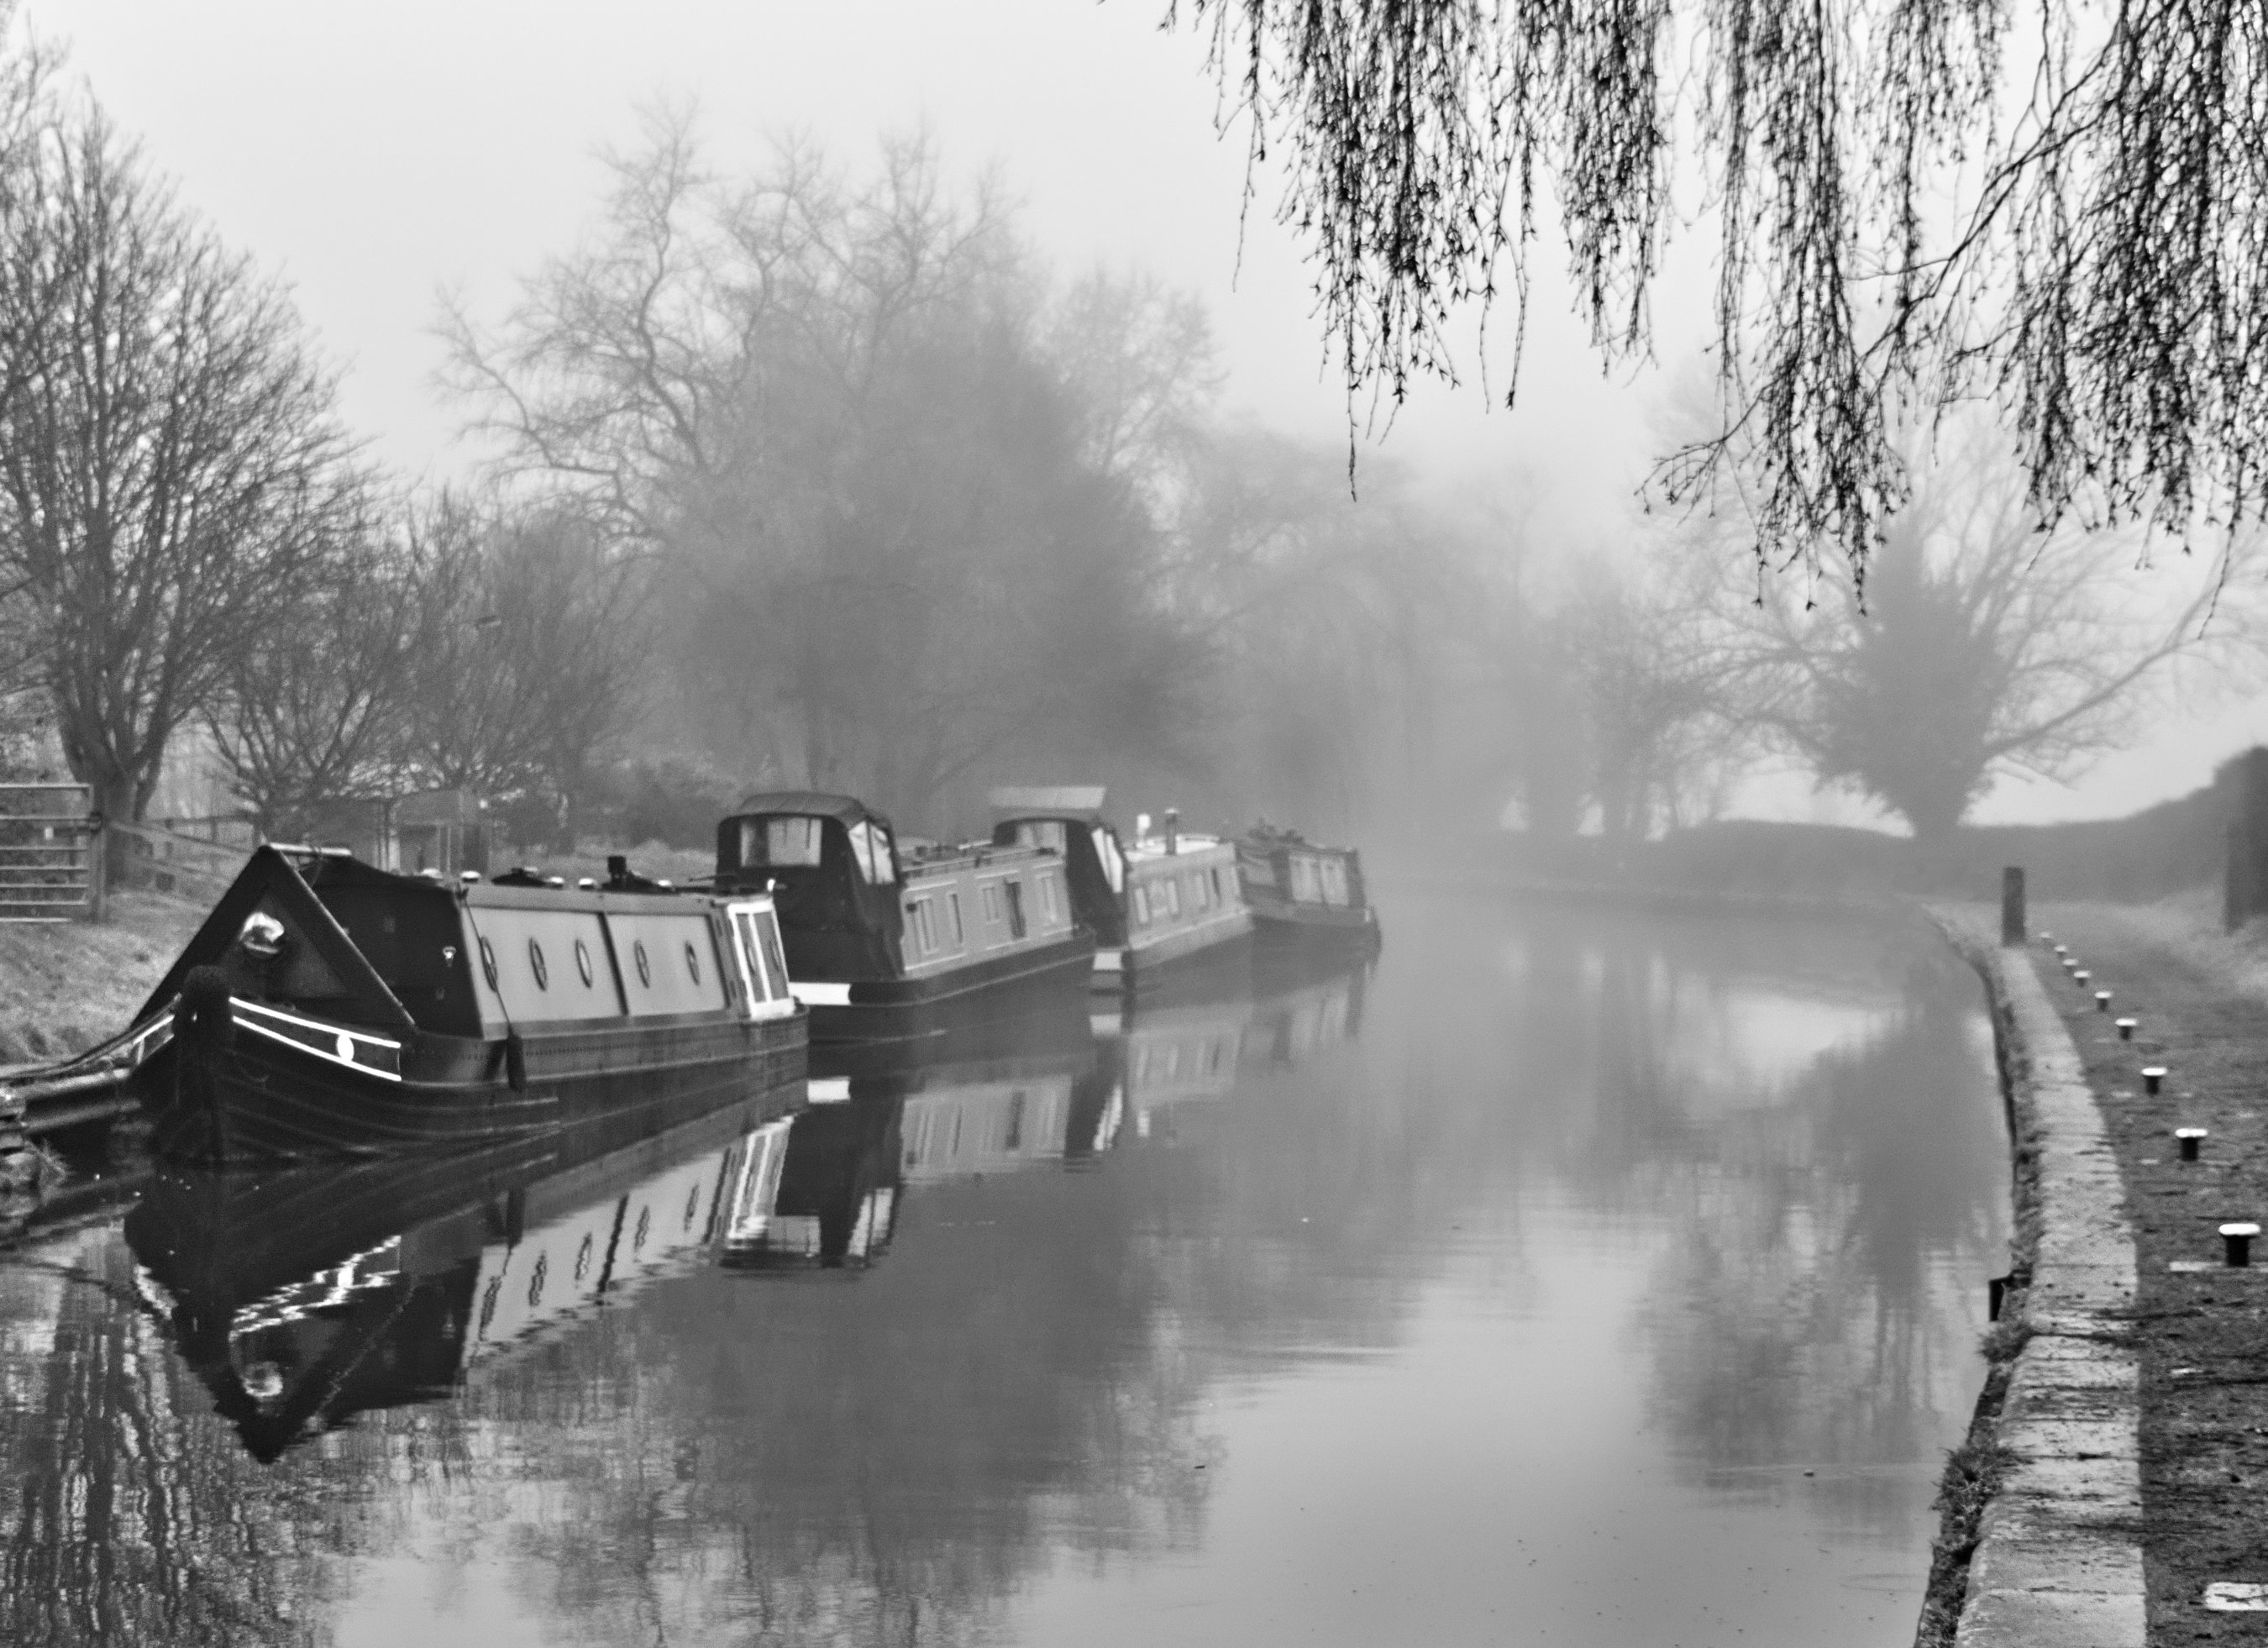 Misty Scene at Grandly Brook by Stuart Ord